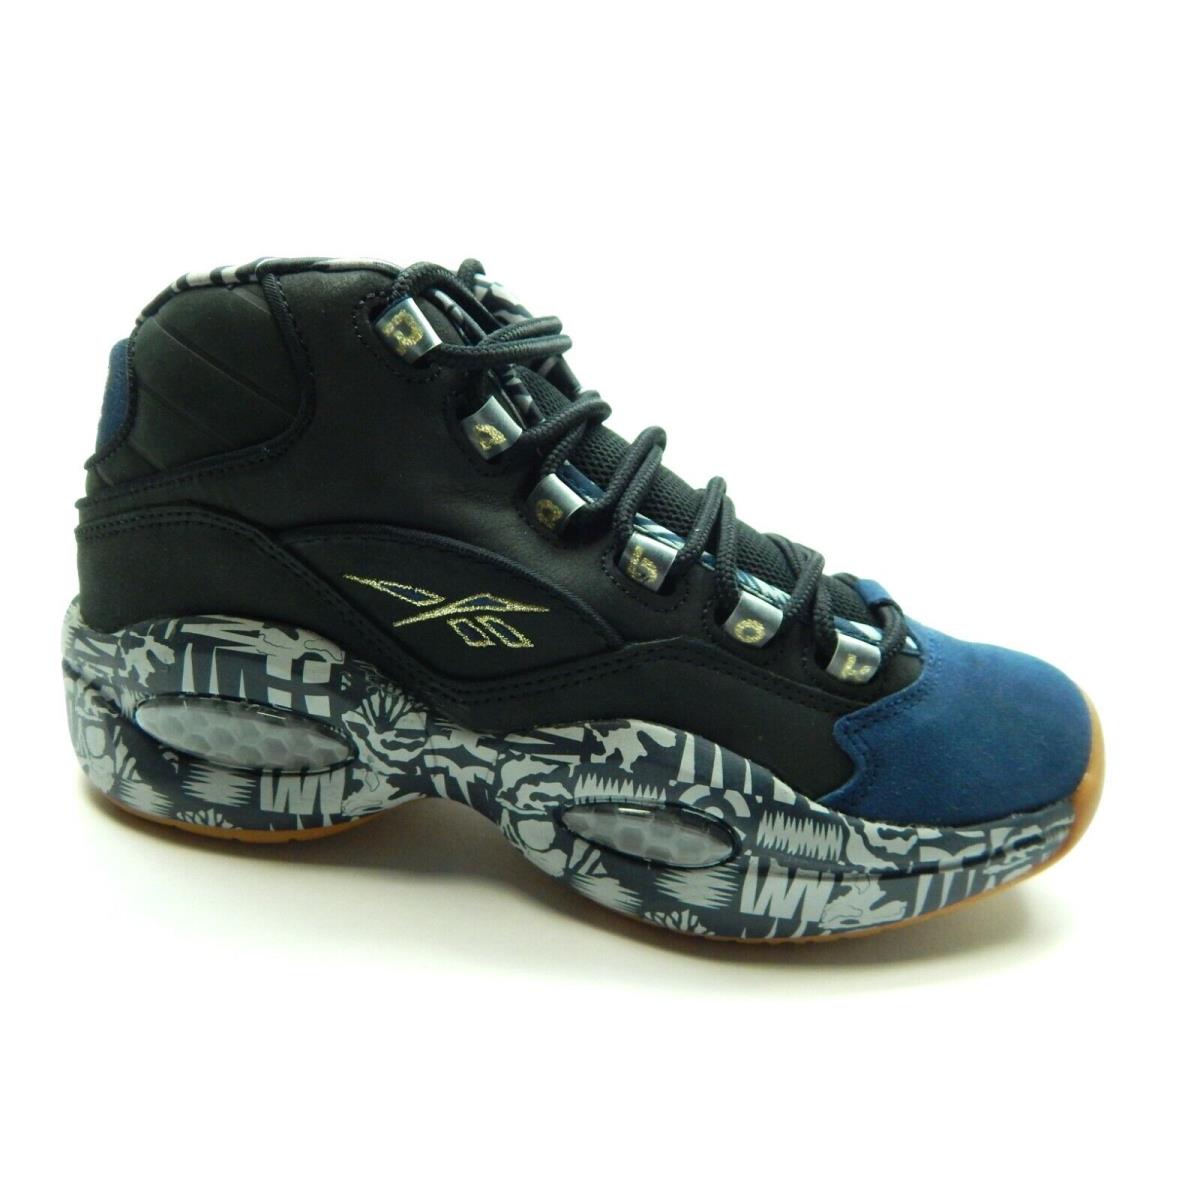 Reebok Question Mid Basketball FX4991 Black Navy Shoes Size 8